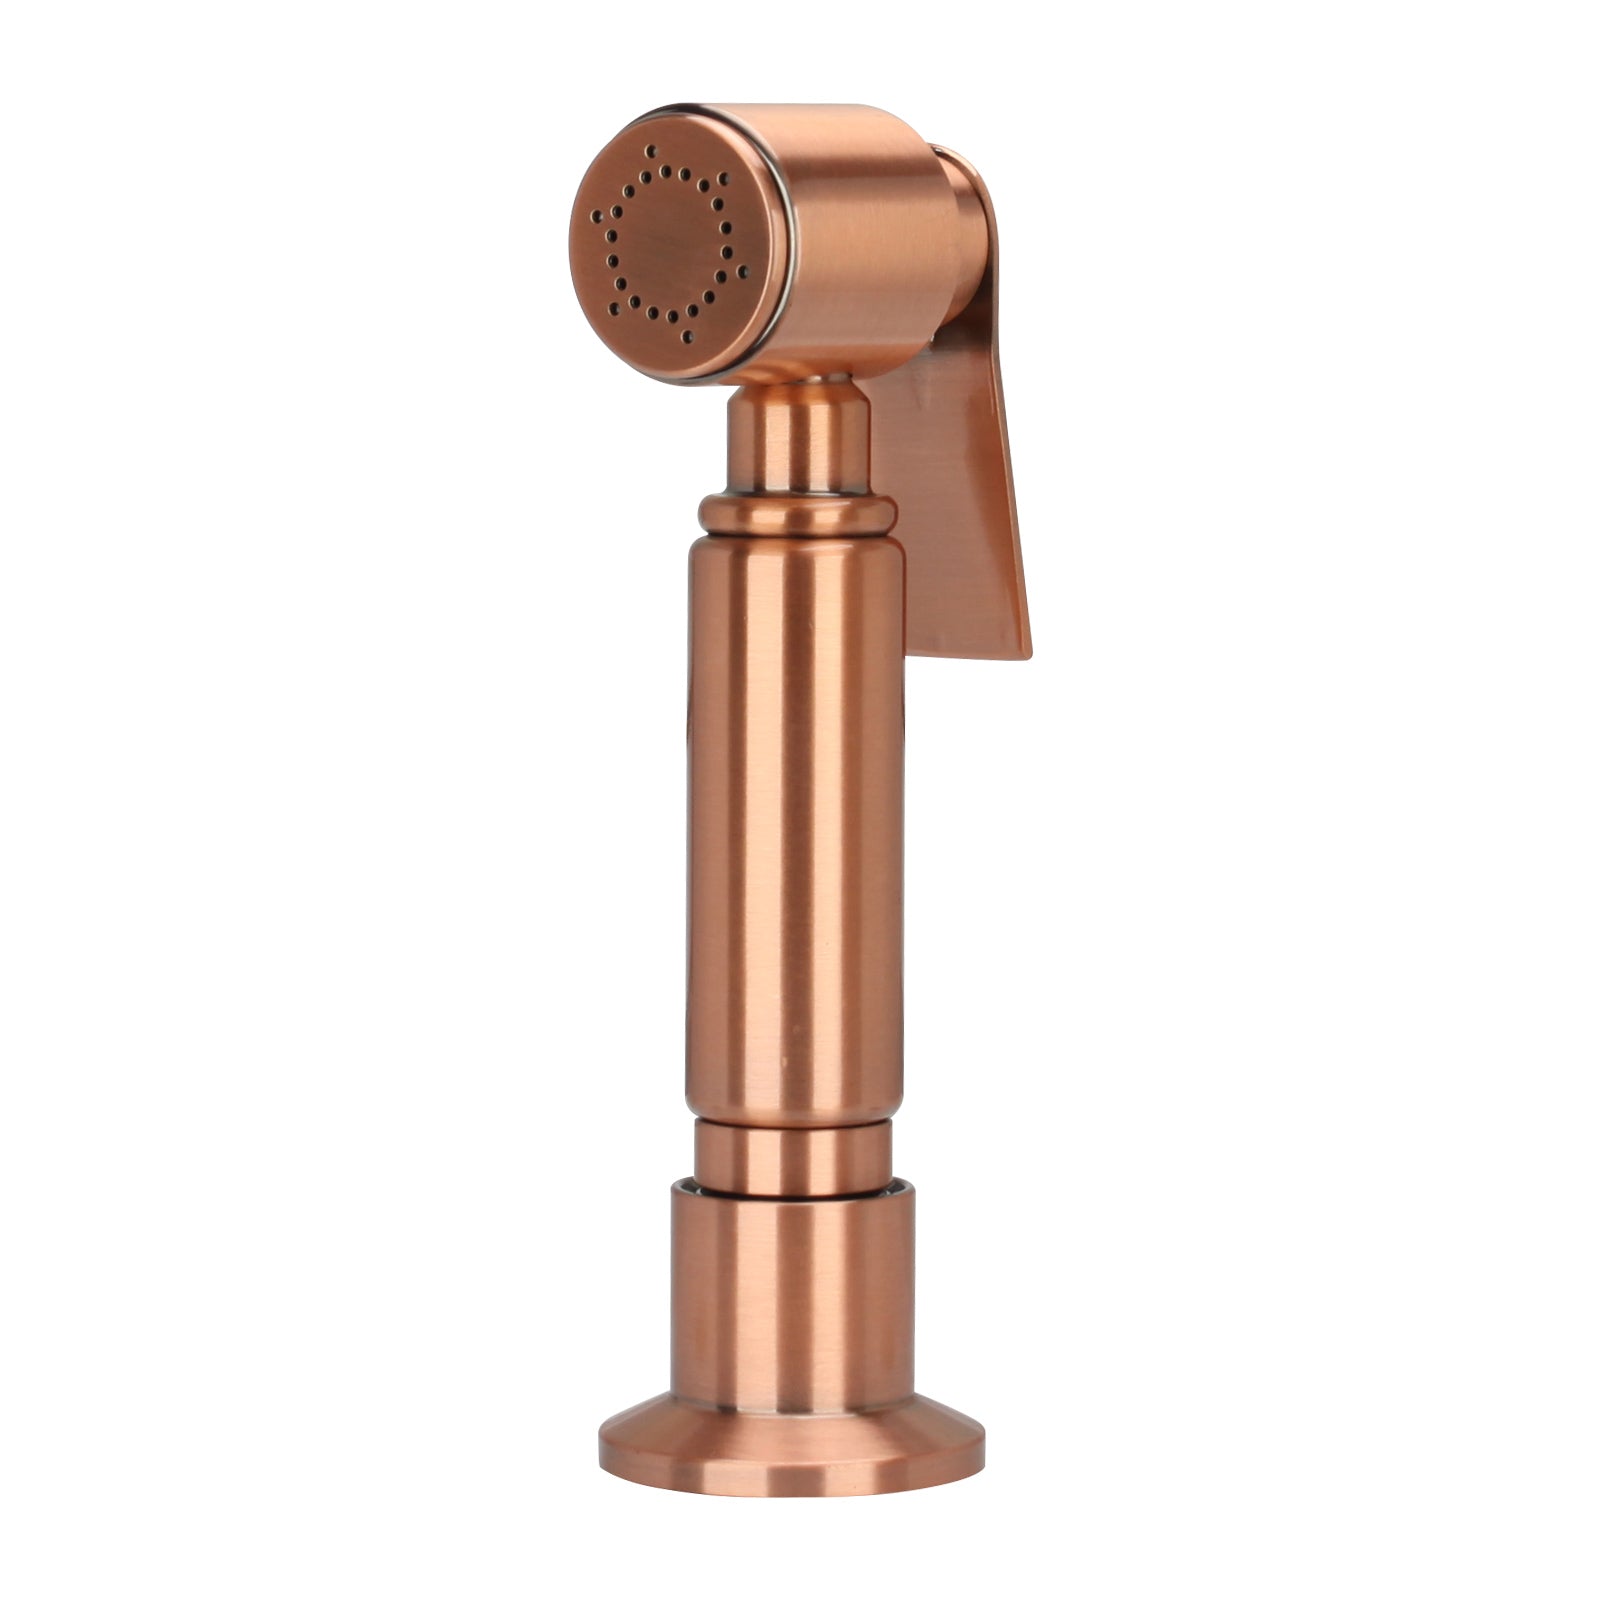 Copper Kitchen Faucet Side Sprayer for Replacement (Modern) only matches for AKICON brand faucets